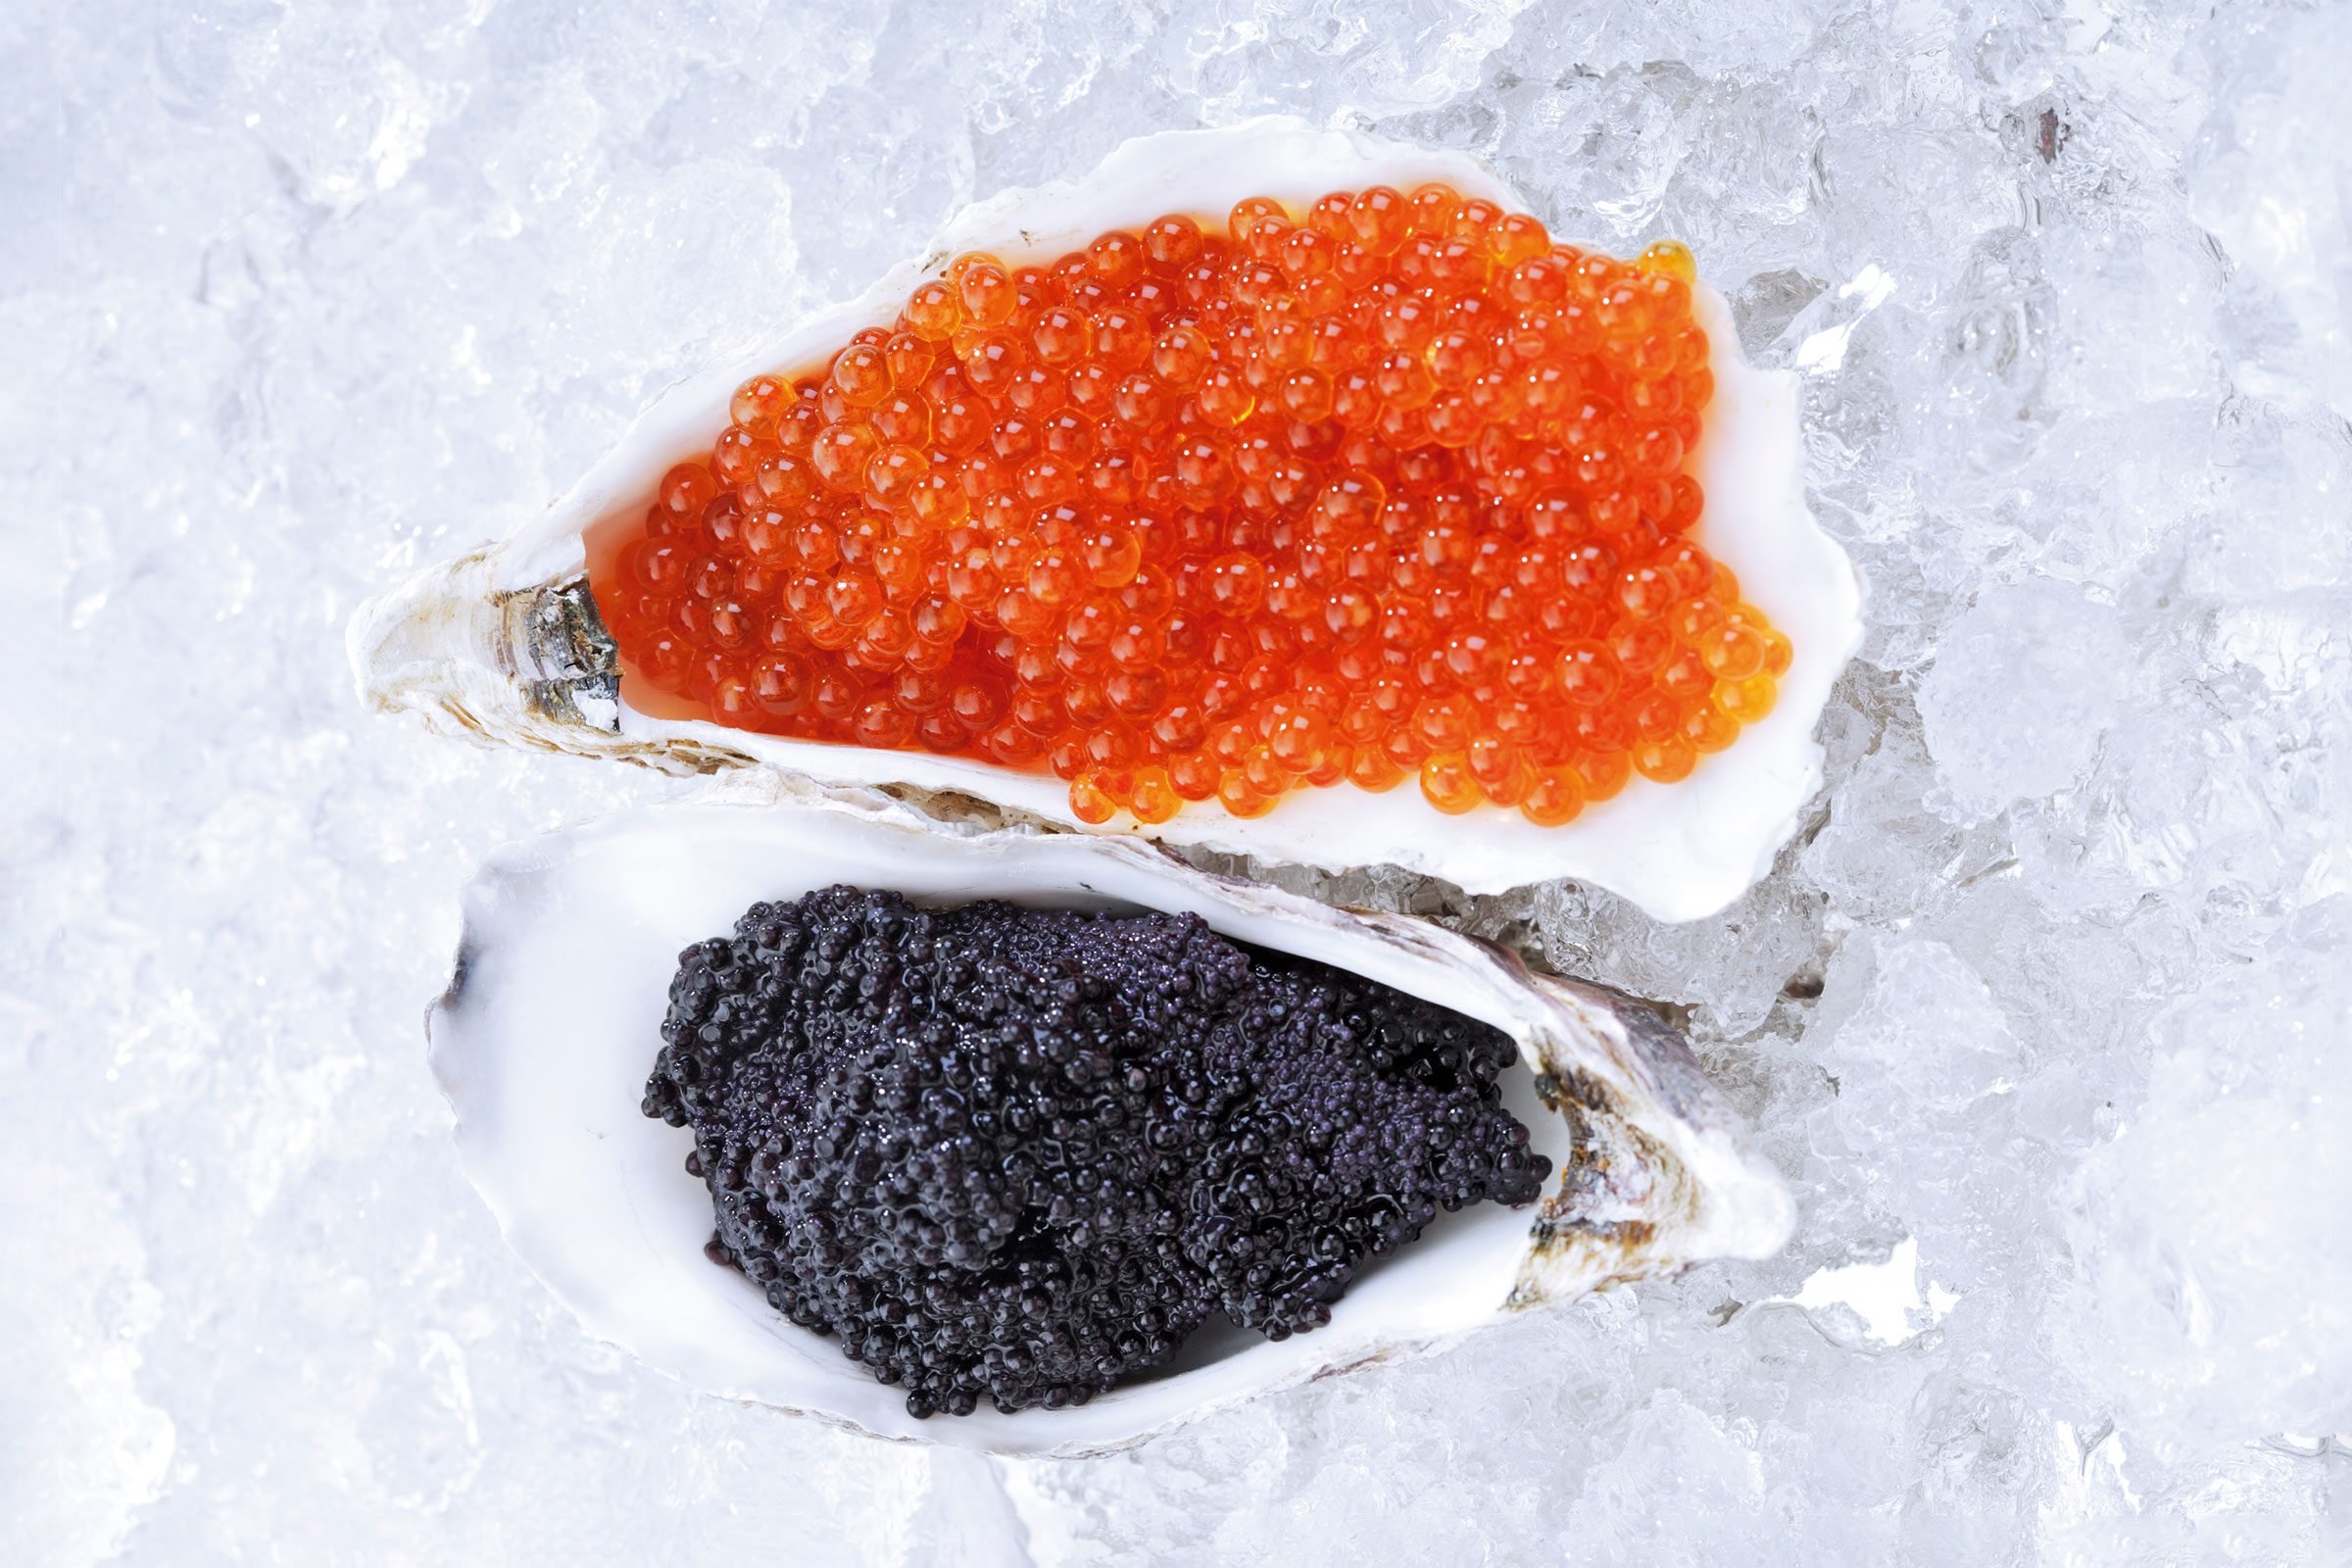 What Is Caviar? — The Difference Between Caviar and Fish Roe